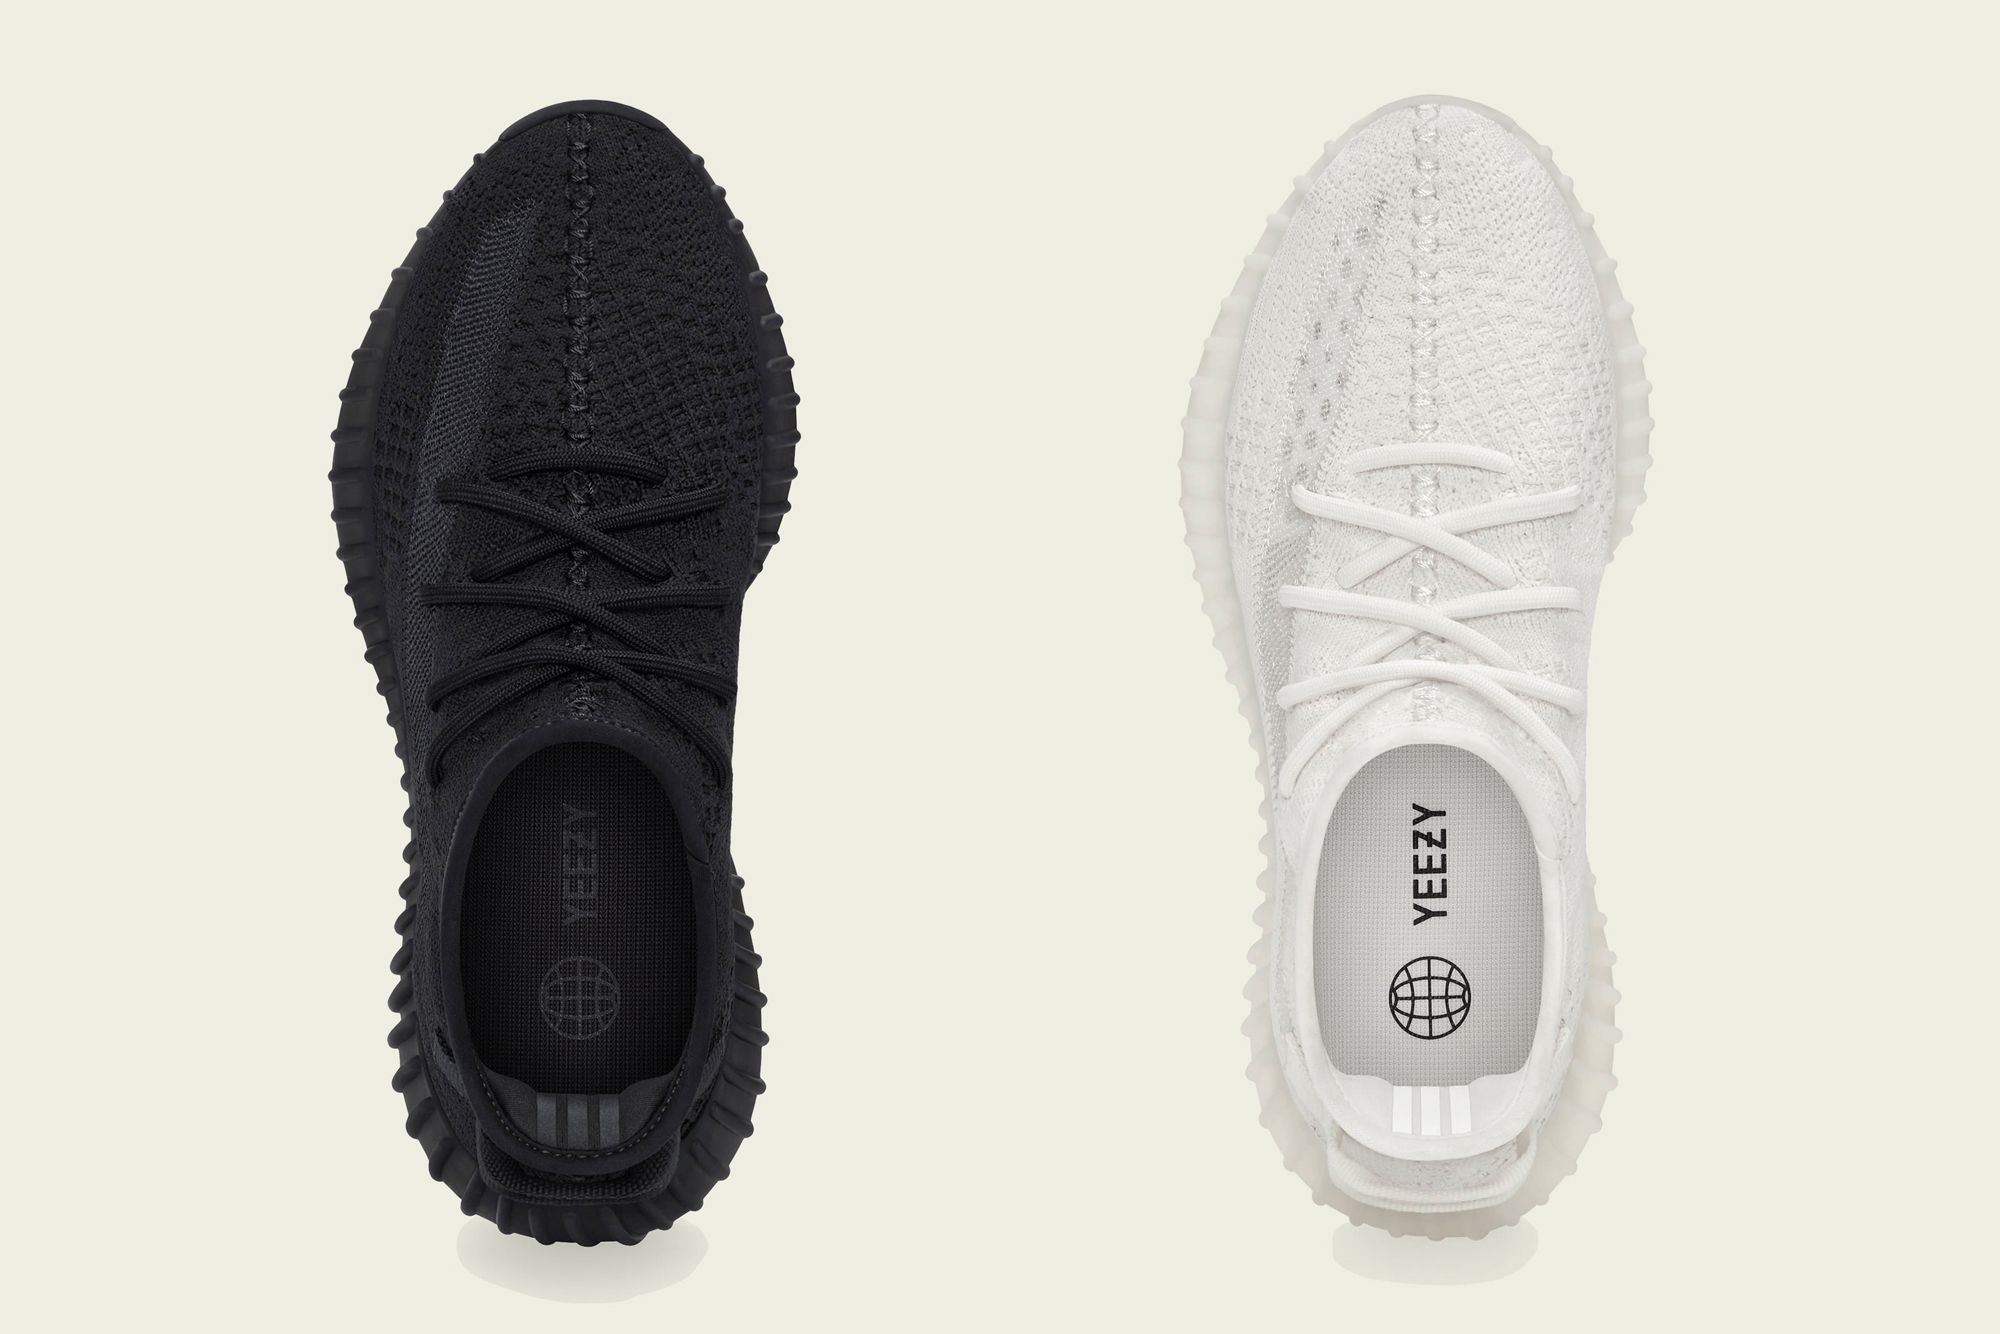 Where to Buy the adidas Yeezy BOOST 350 V2 'Onyx' and 'Bone